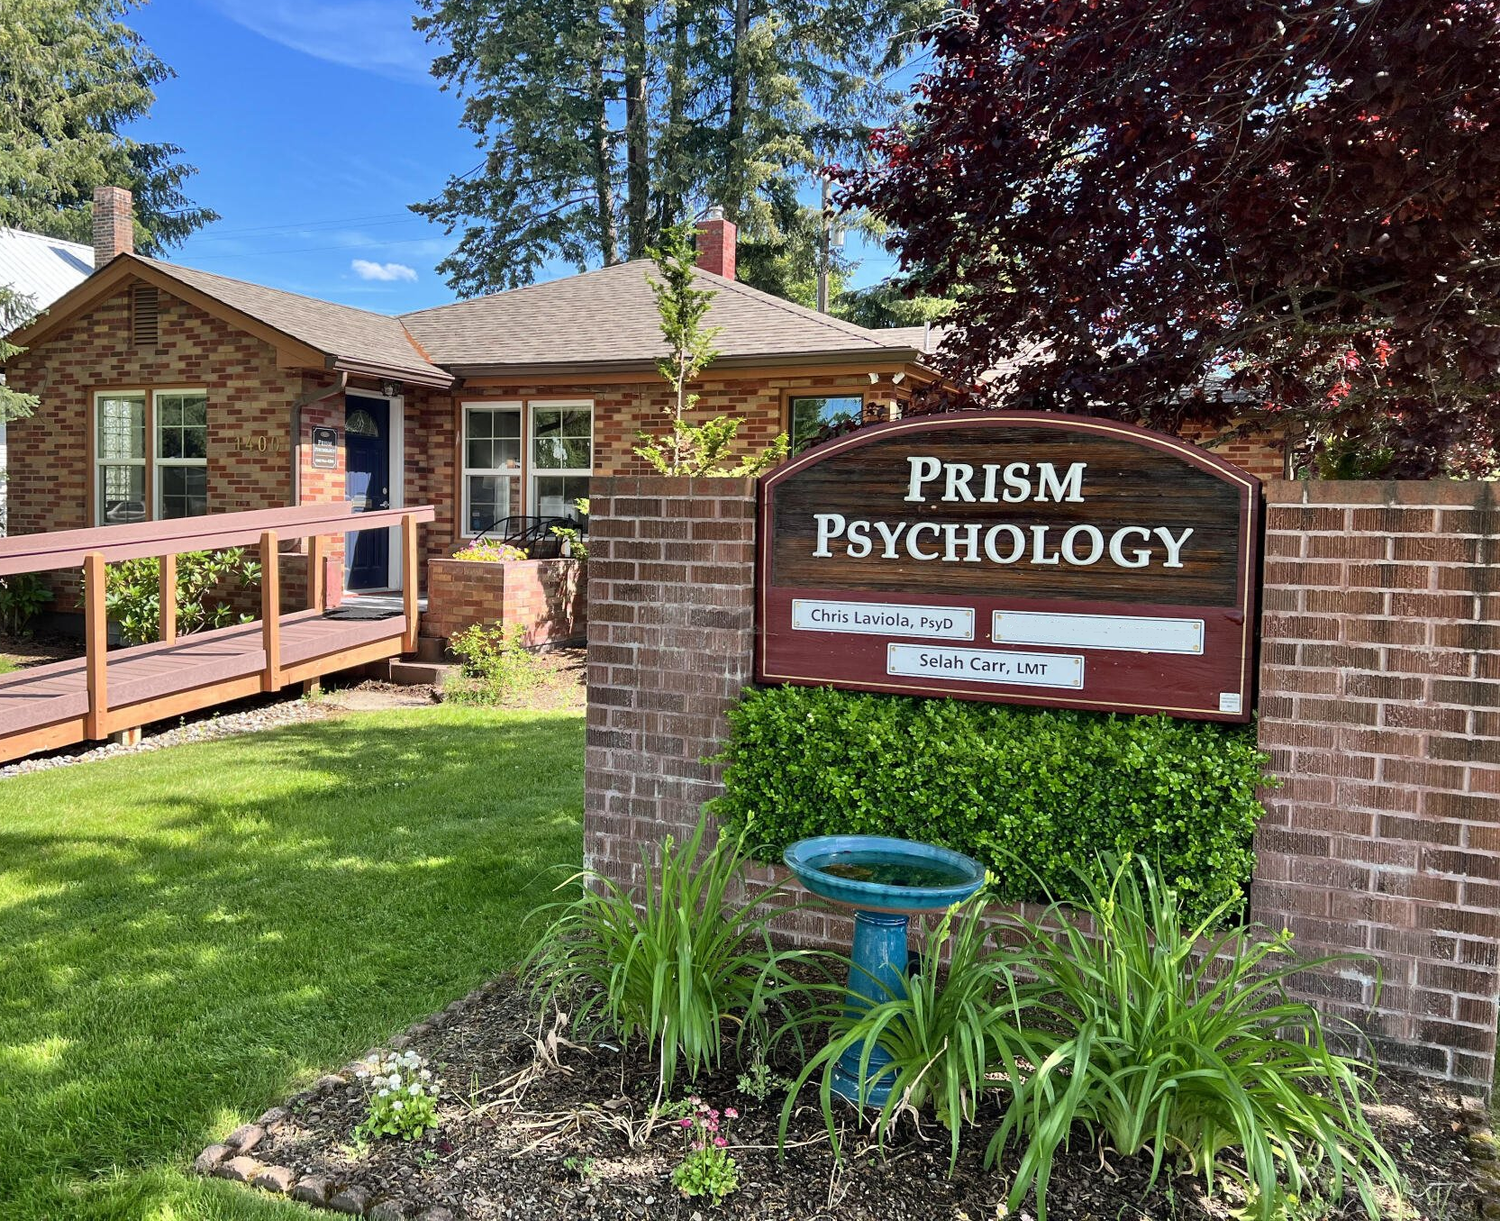 Gallery Photo of Prism Psychology